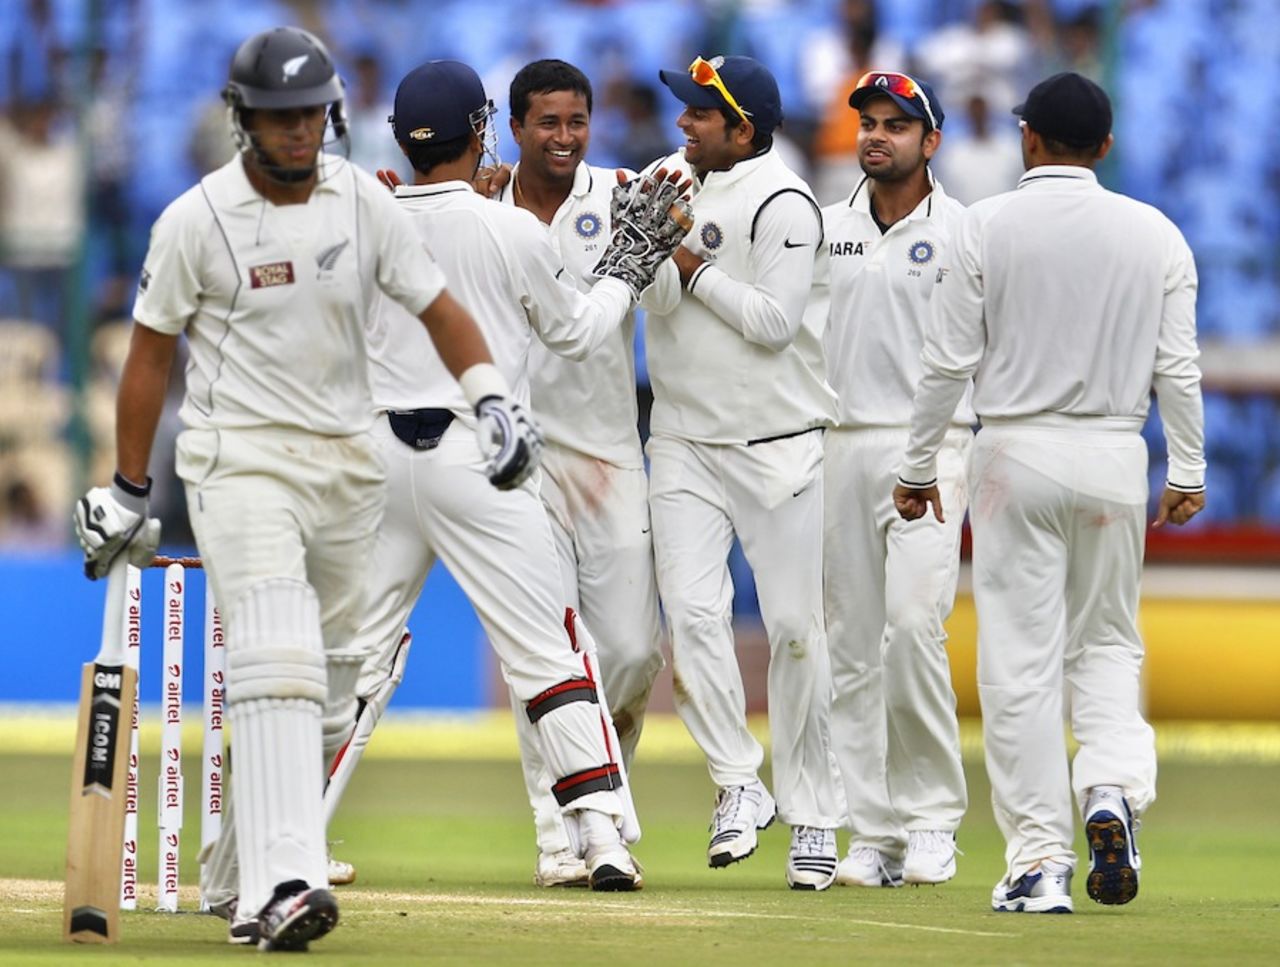 Pragyan Ojha being congratulated by team-mates after he picked up Ross Taylor's wicket, India v New Zealand, 2nd Test, Bangalore, 1st day, August 31, 2012